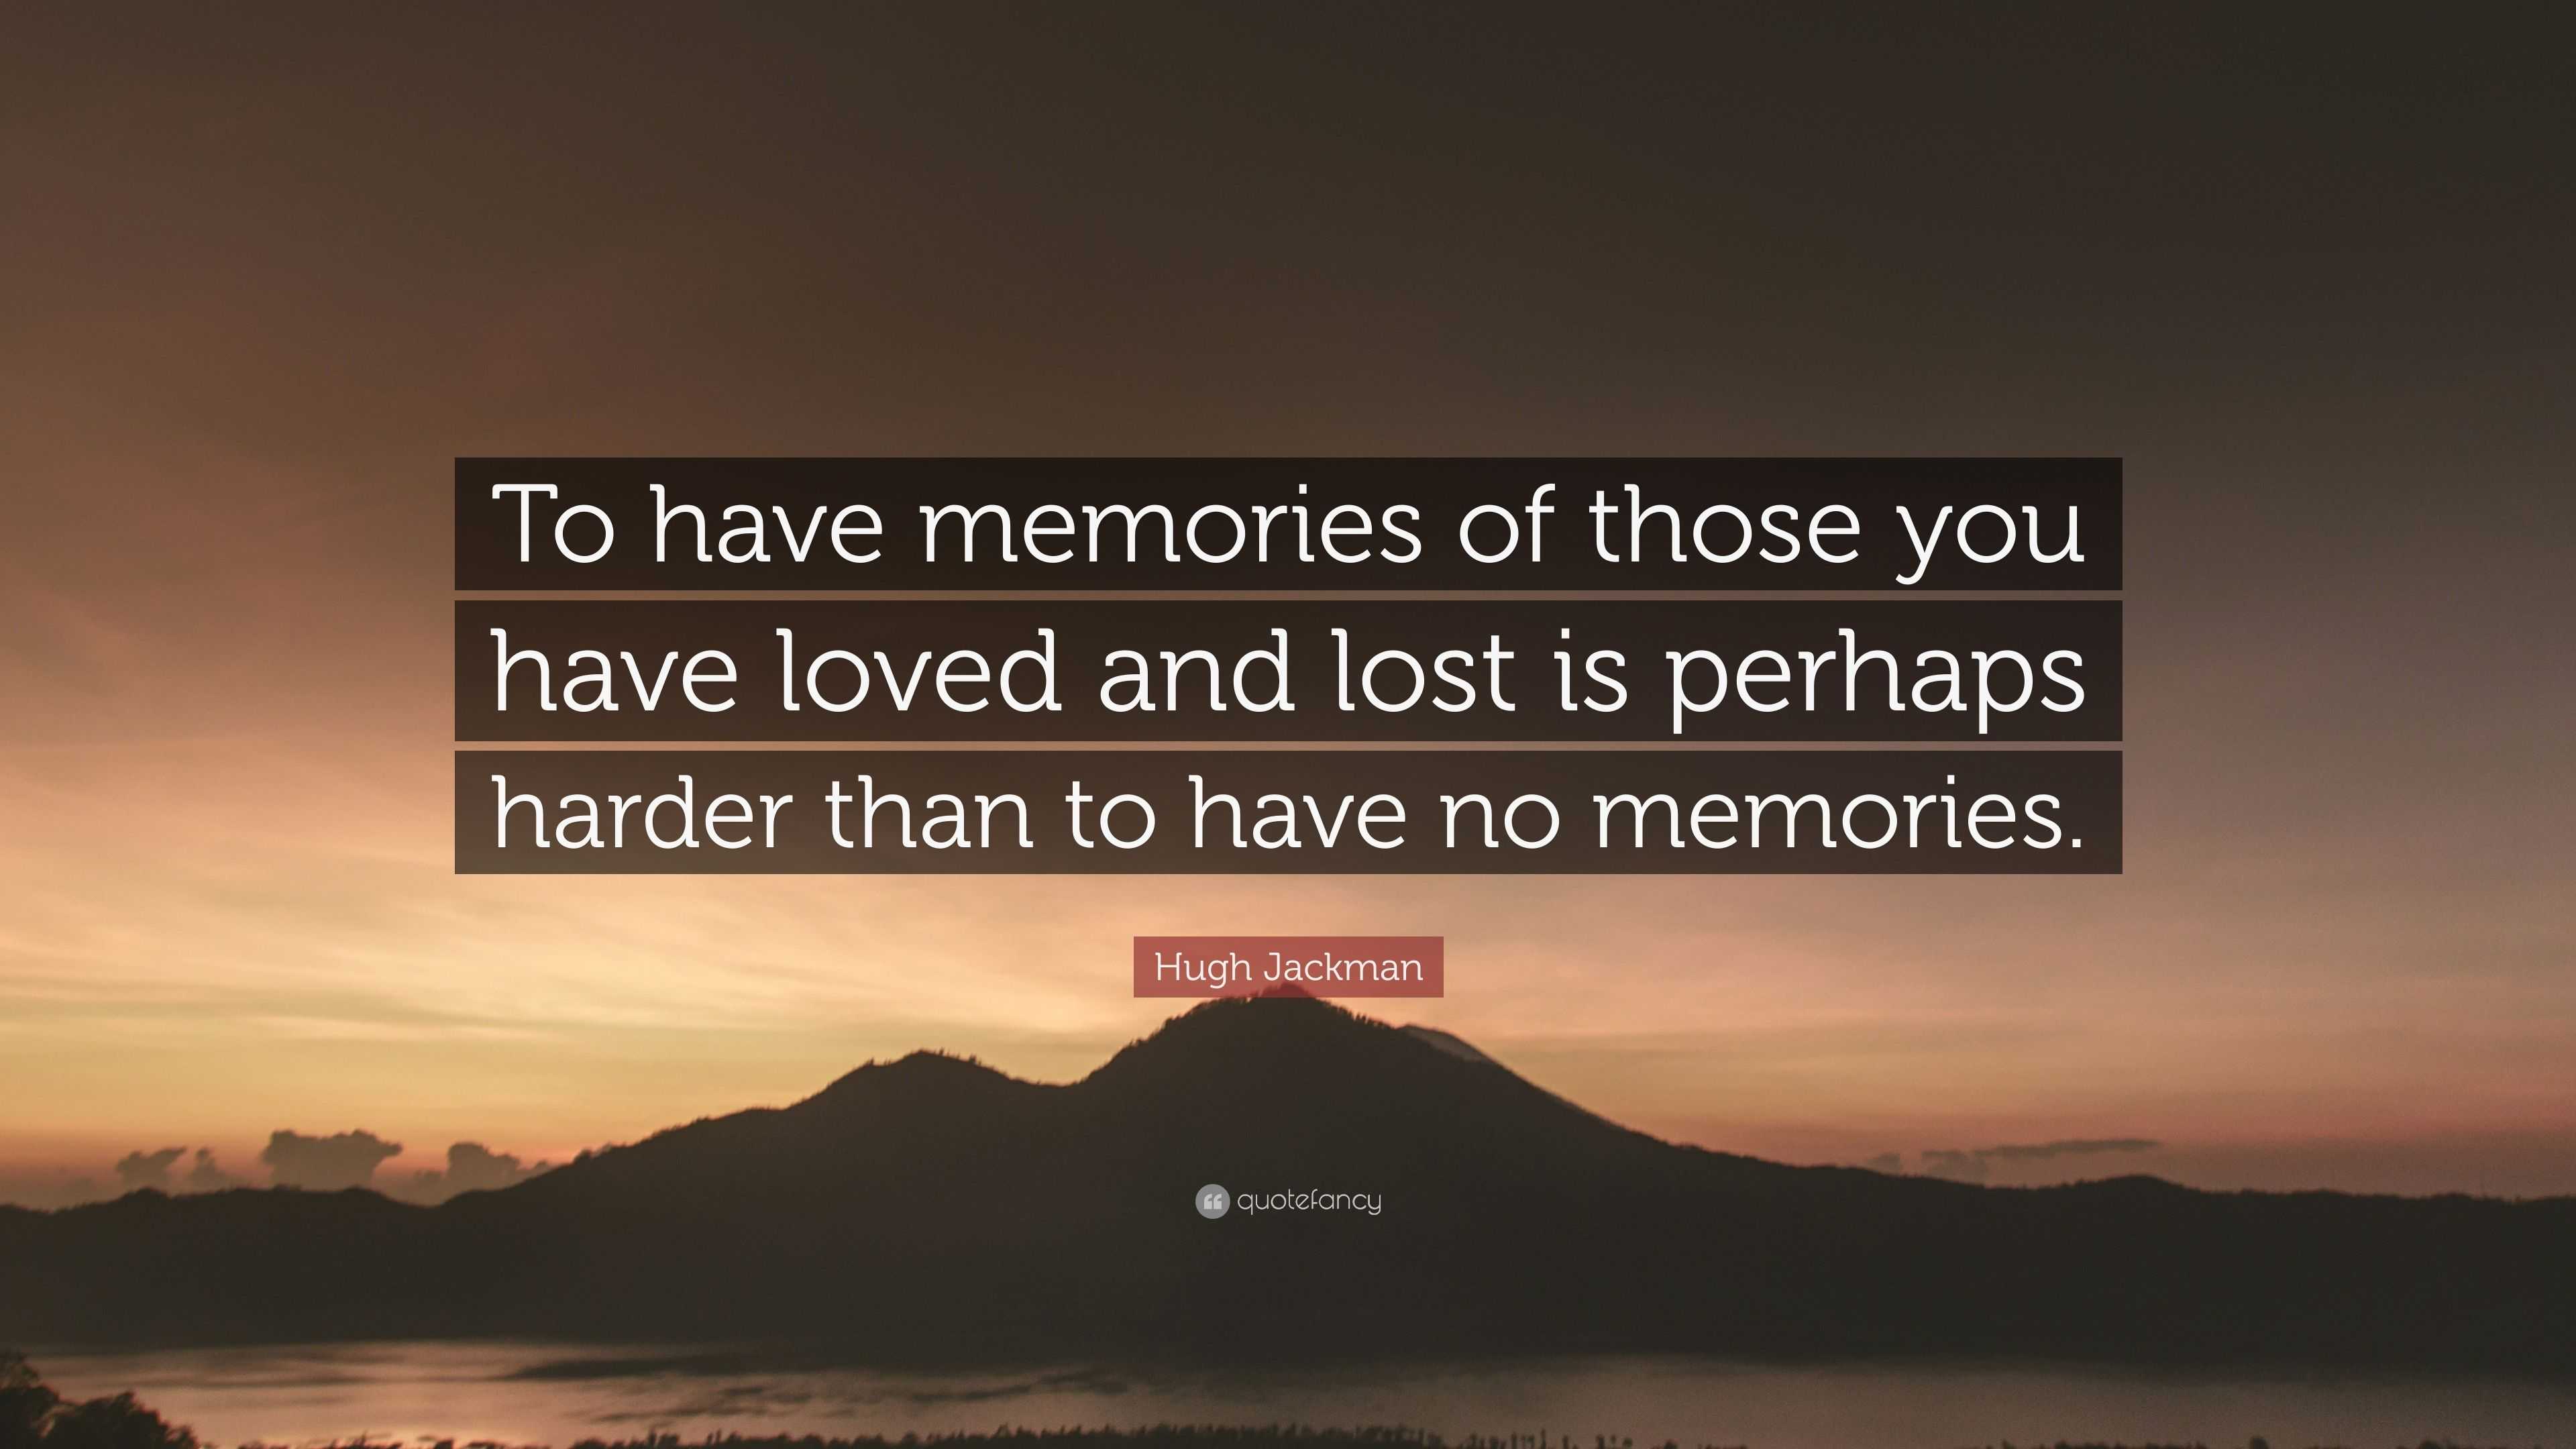 Hugh Jackman Quote: “To have memories of those you have loved and lost ...